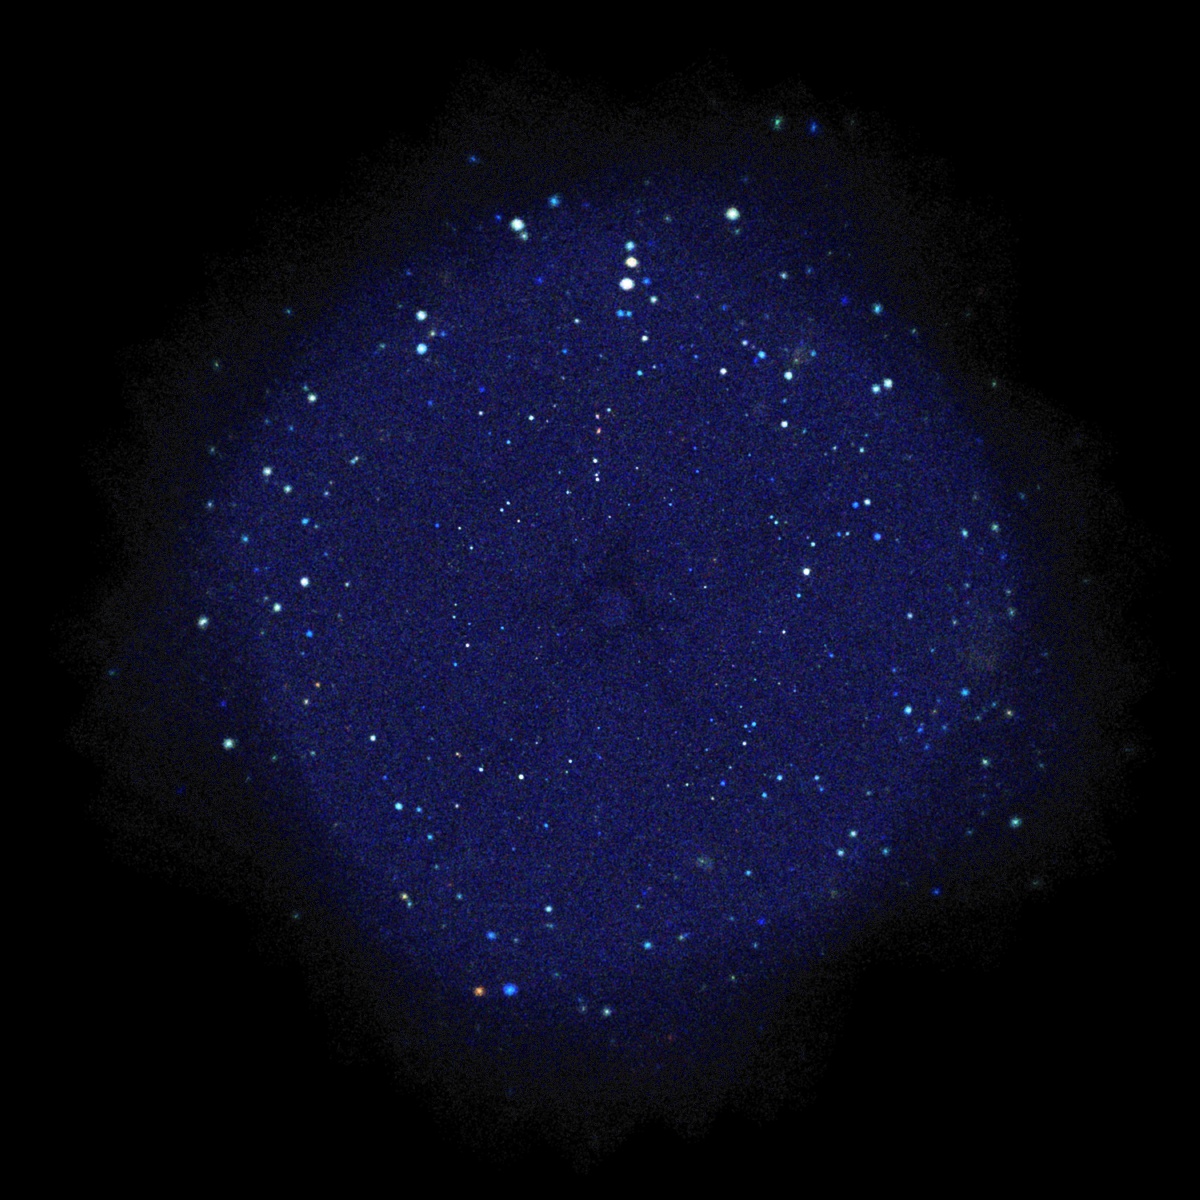 CDF-S combined image